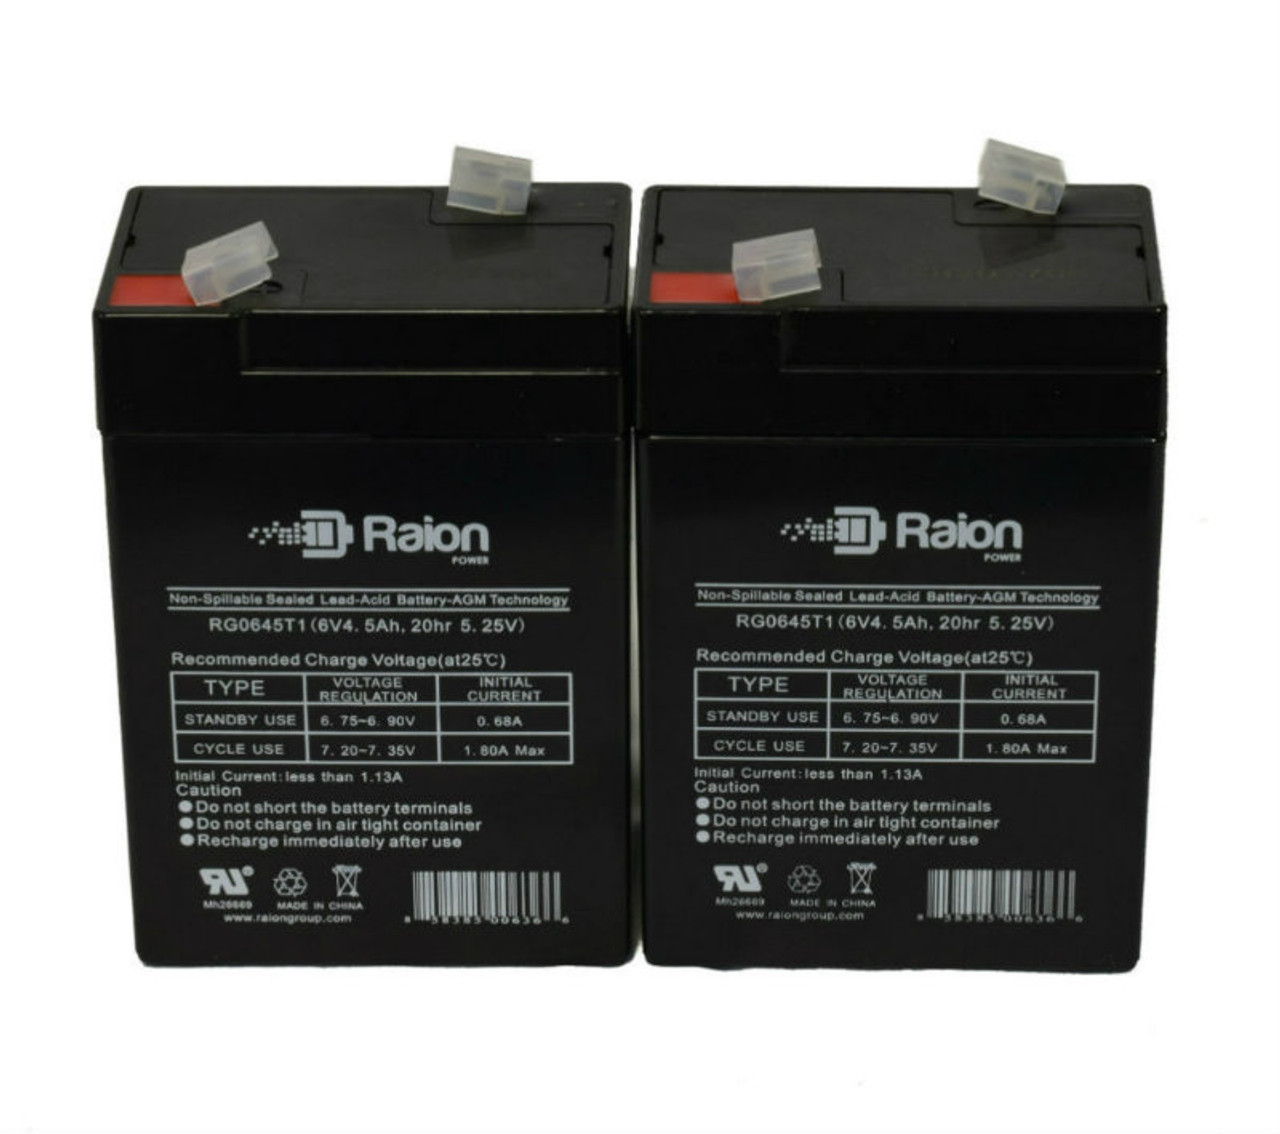 Raion Power 6V 4.5Ah Replacement Emergency Light Battery for Big Beam 2SD6S5 - 2 Pack